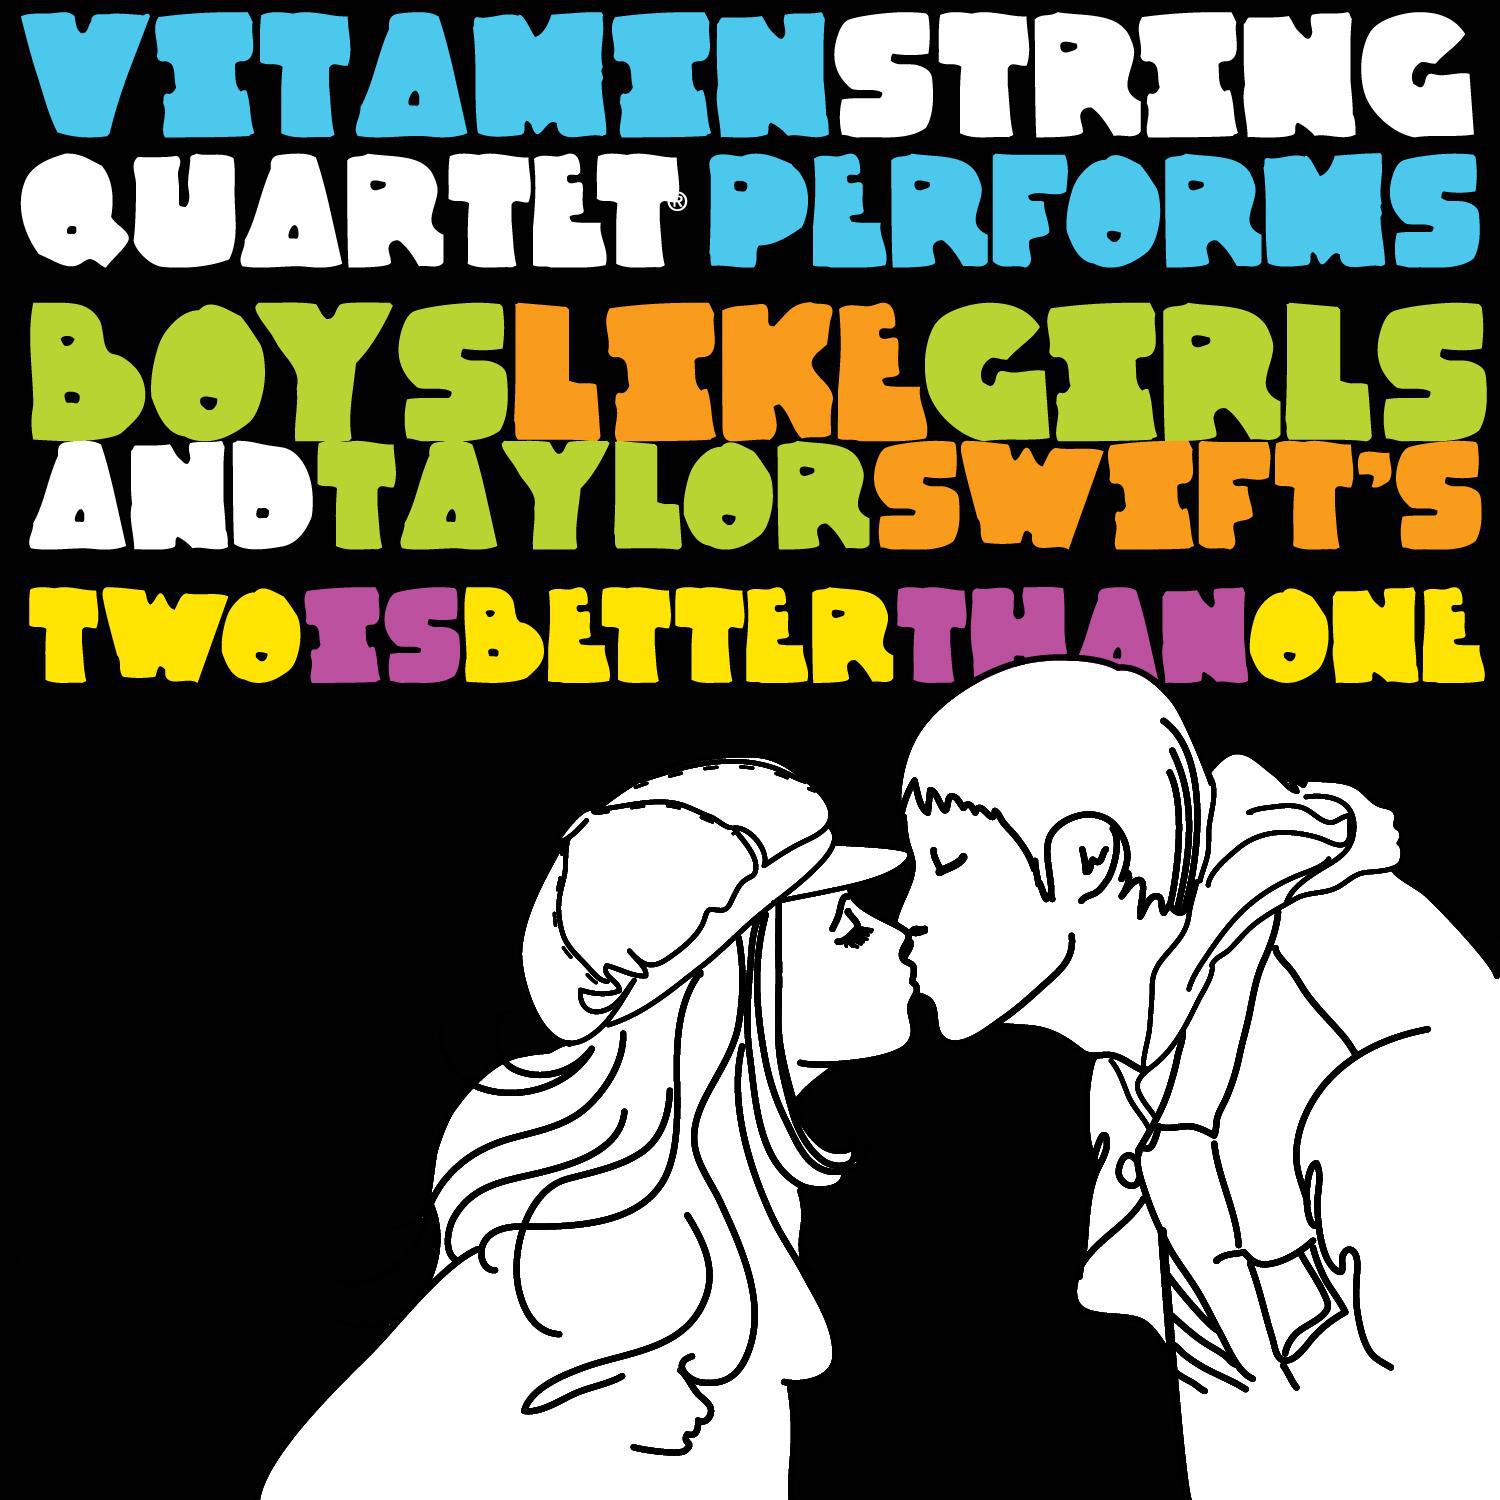 Vitamin String Quartet Performs Boys Like Girls and Taylor Swift's Two Is Better Than One专辑